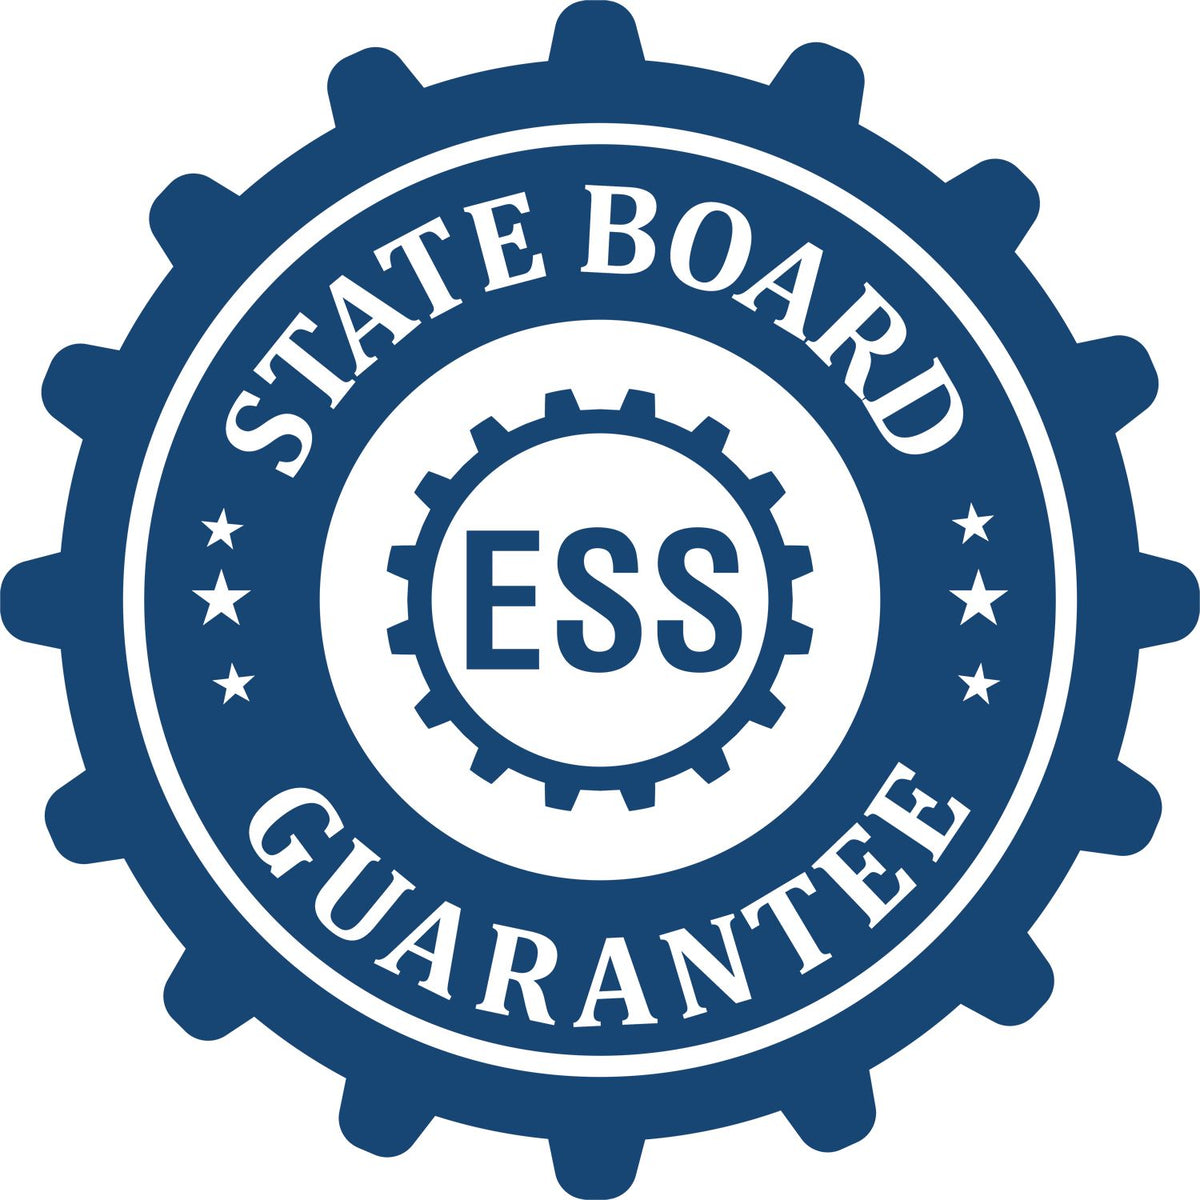 An emblem in a gear shape illustrating a state board guarantee for the Soft New York Professional Engineer Seal product.